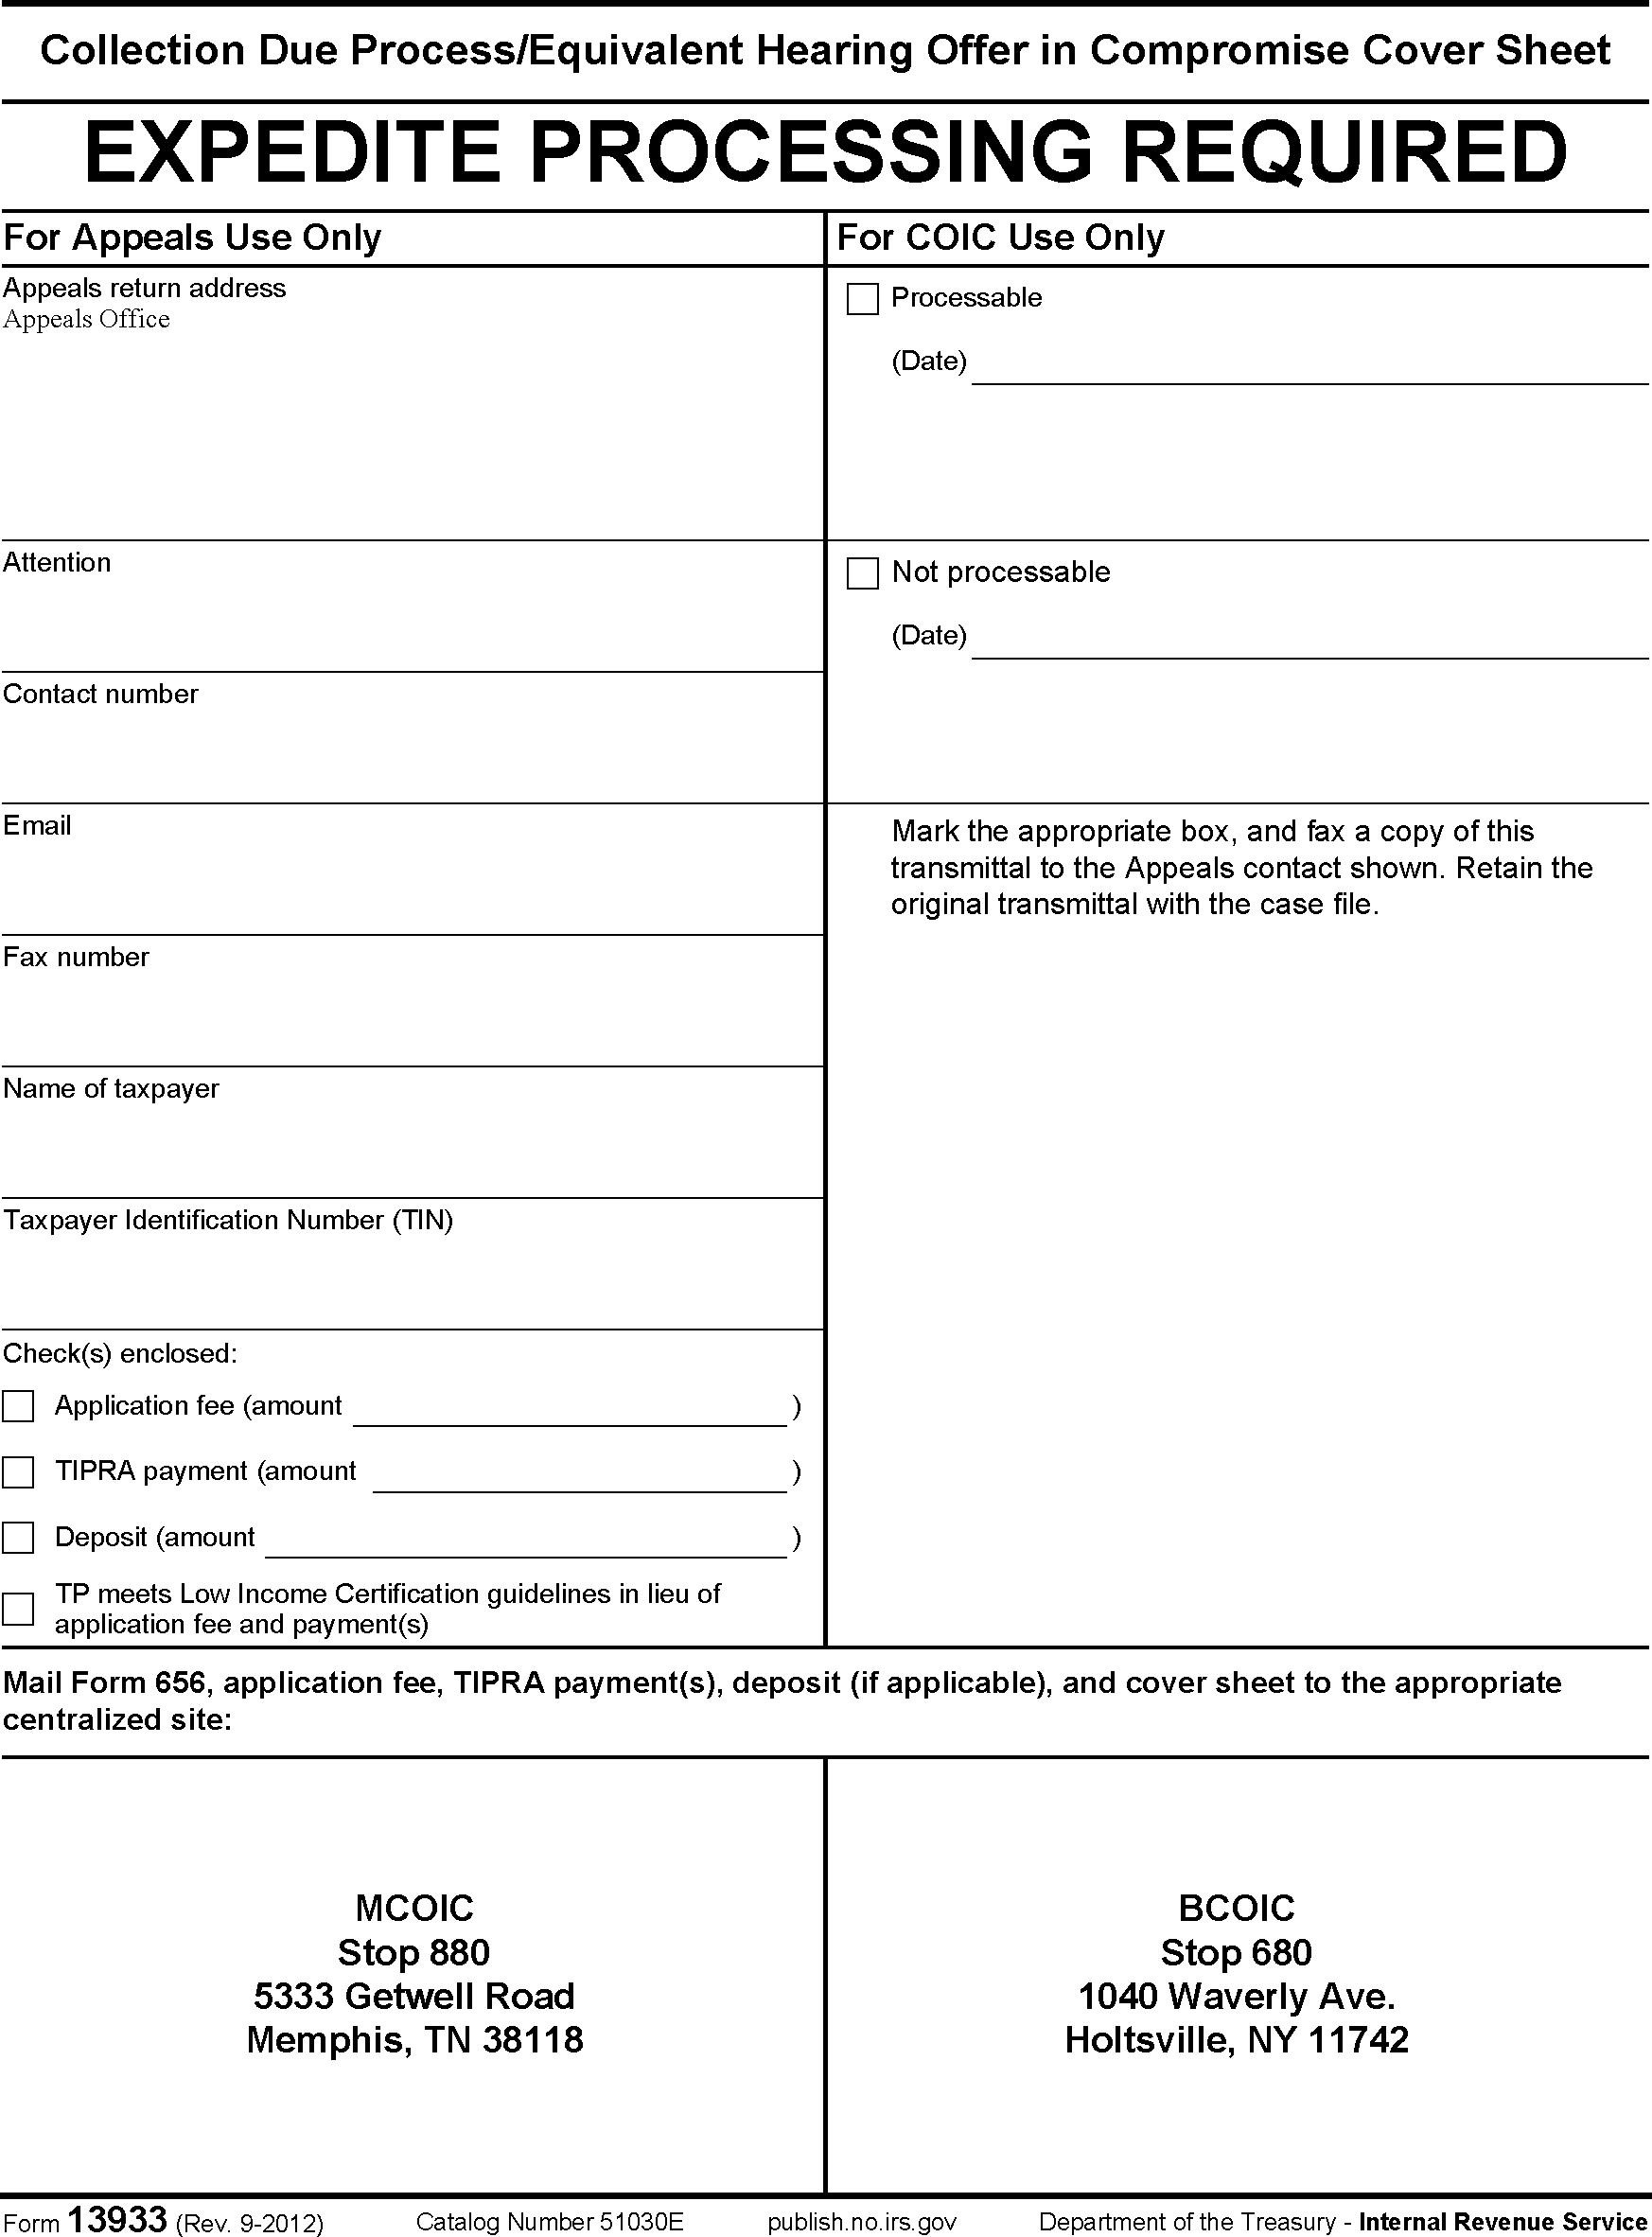 Offer In Compromise Application Fee And Payment Worksheet